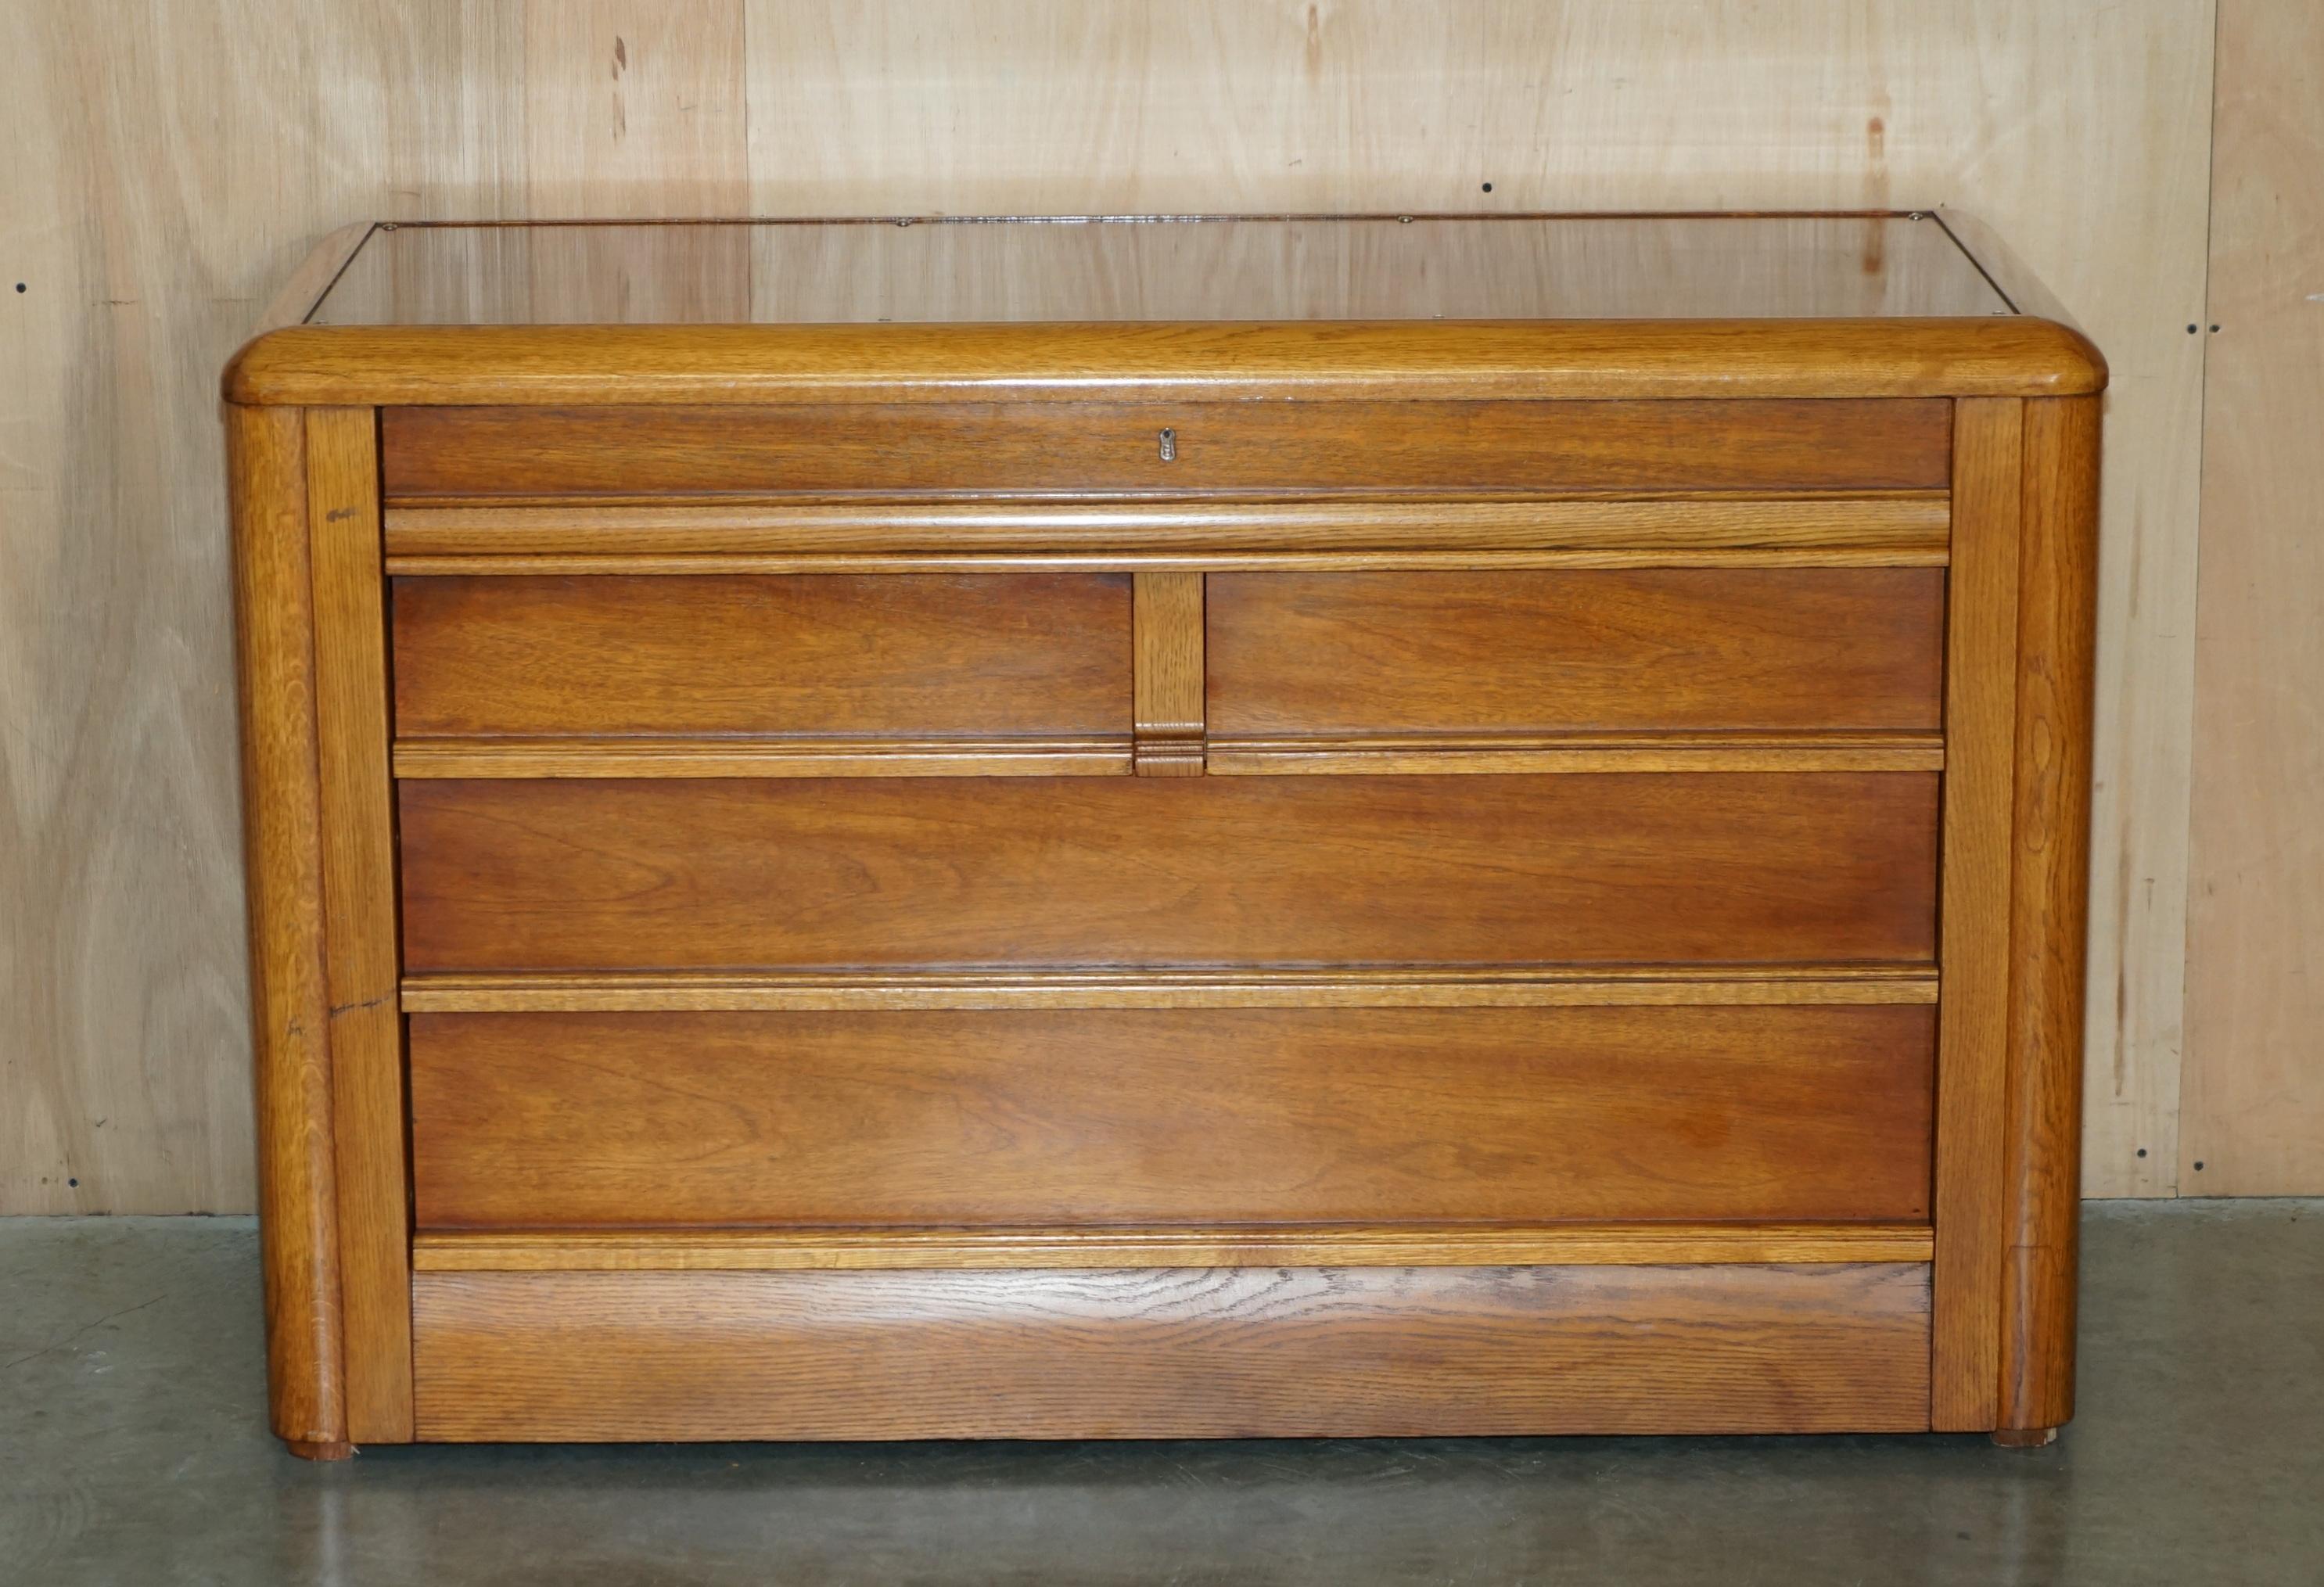 Royal House Antiques

Royal House Antiques is delighted to offer for sale this lovely Ralph Lauren American Mahogany and Oak Contemporary  chest of drawers with lockable top drawer

Please note the delivery fee listed is just a guide, it covers